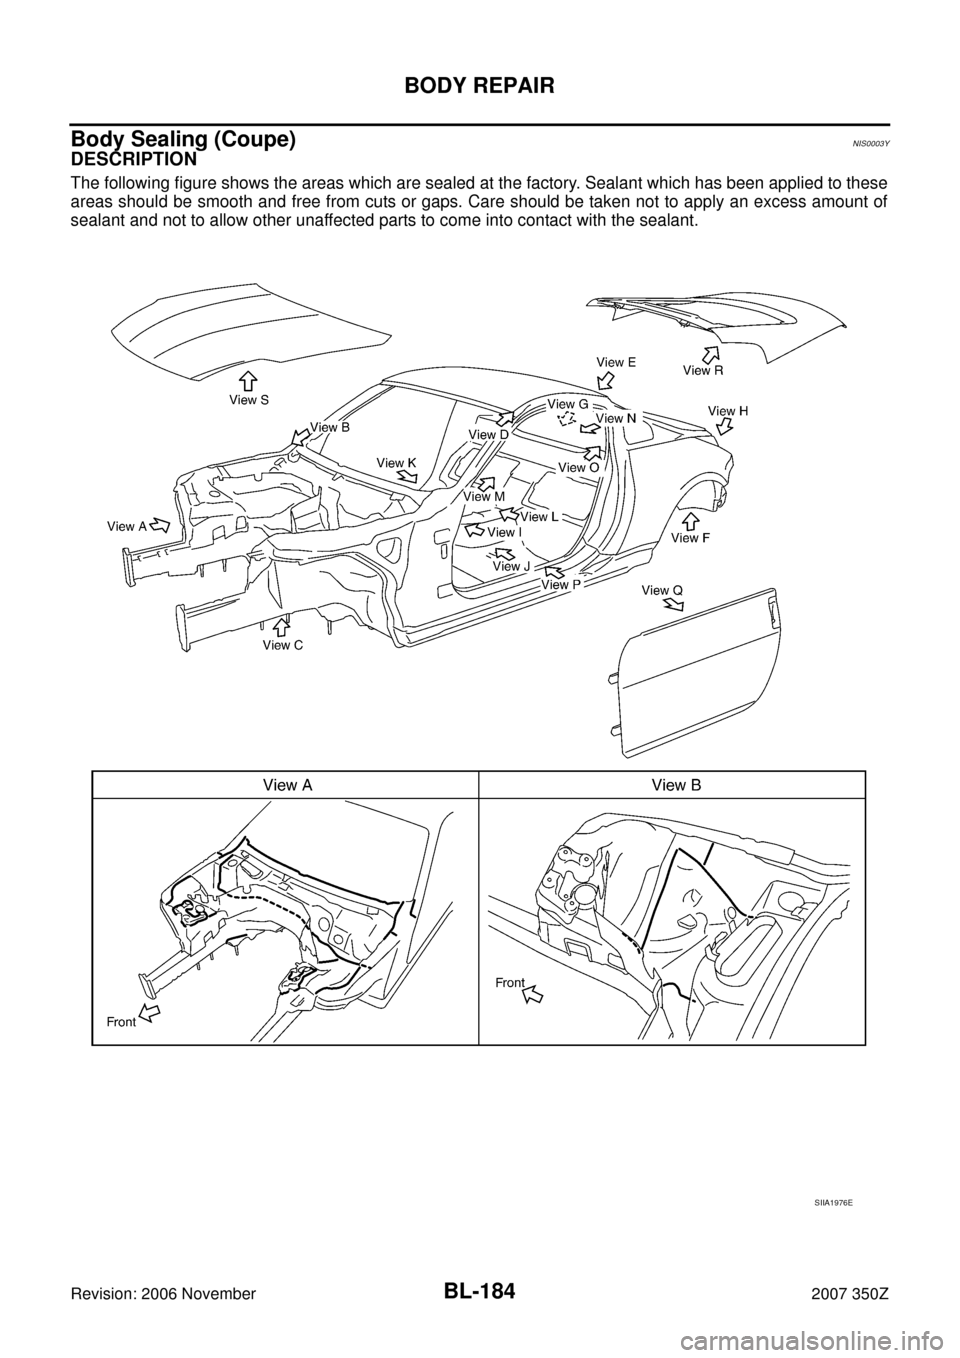 NISSAN 350Z 2007 Z33 Body, Lock And Security System Workshop Manual BL-184
BODY REPAIR
Revision: 2006 November2007 350Z
Body Sealing (Coupe)NIS0003Y
DESCRIPTION
The following figure shows the areas which are sealed at the factory. Sealant which has been applied to the